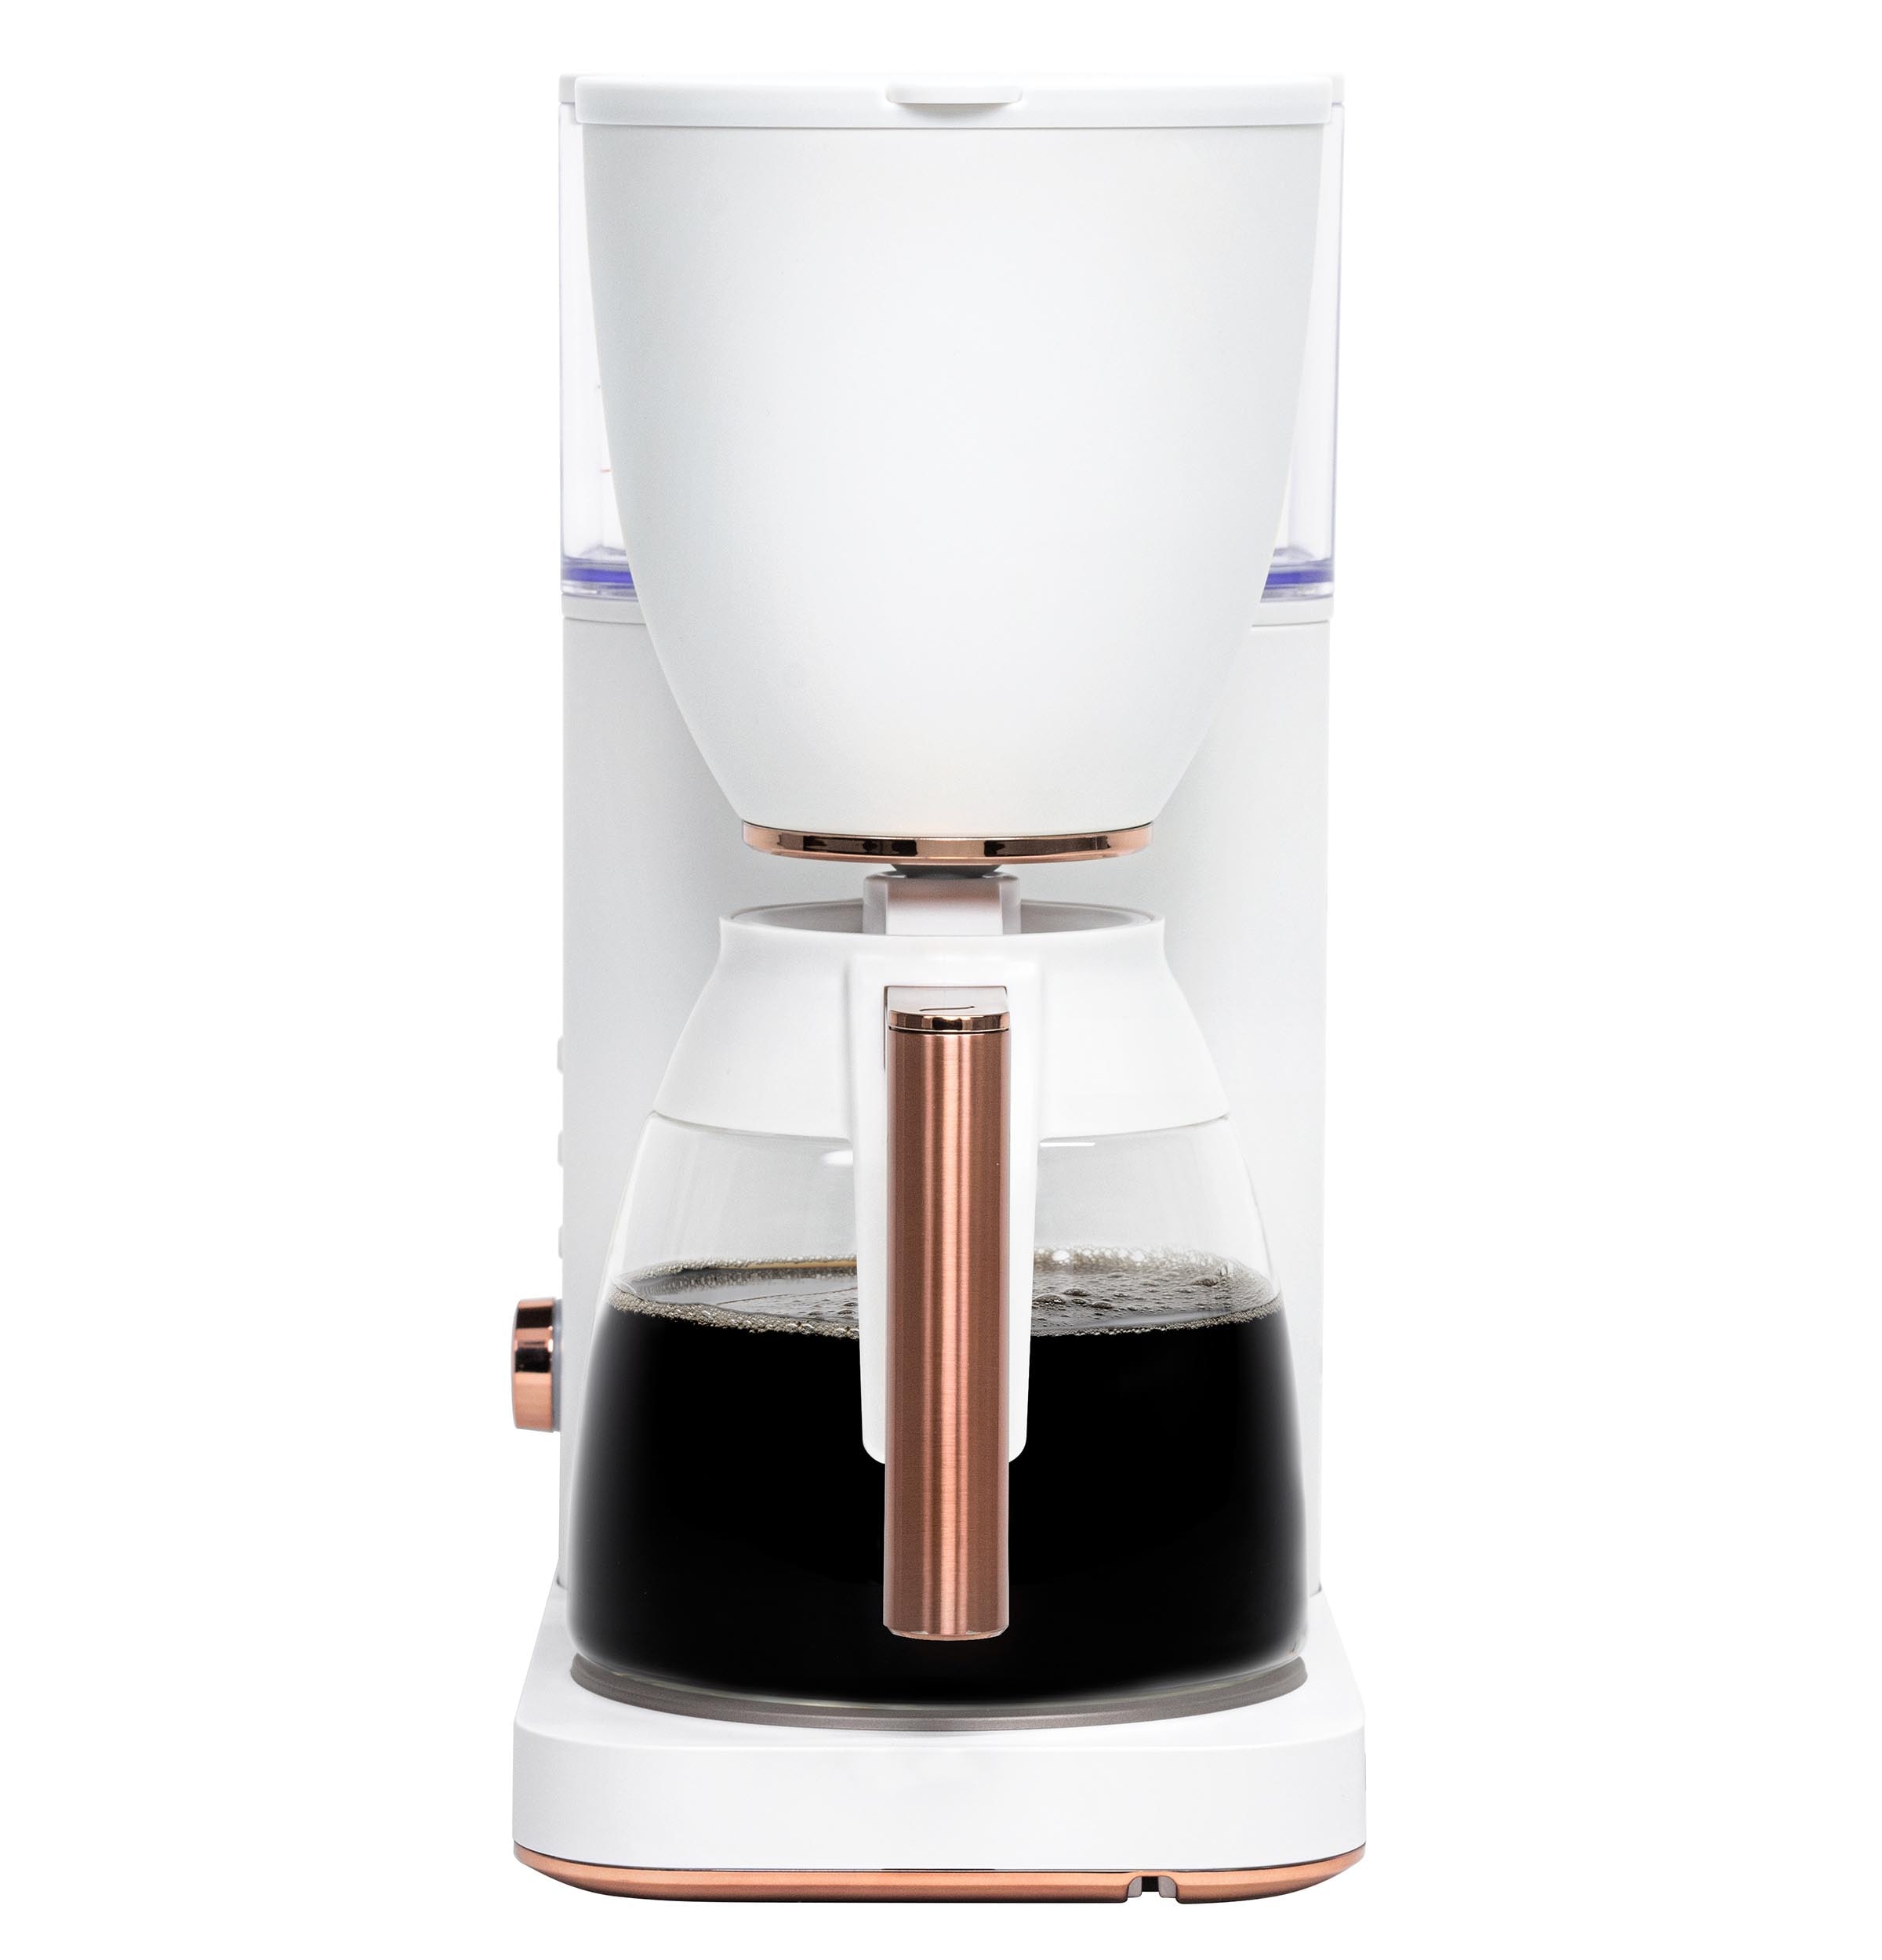 GE Cafe Matte White 10-Cup Drip Coffee Maker with Thermal Carafe + Reviews